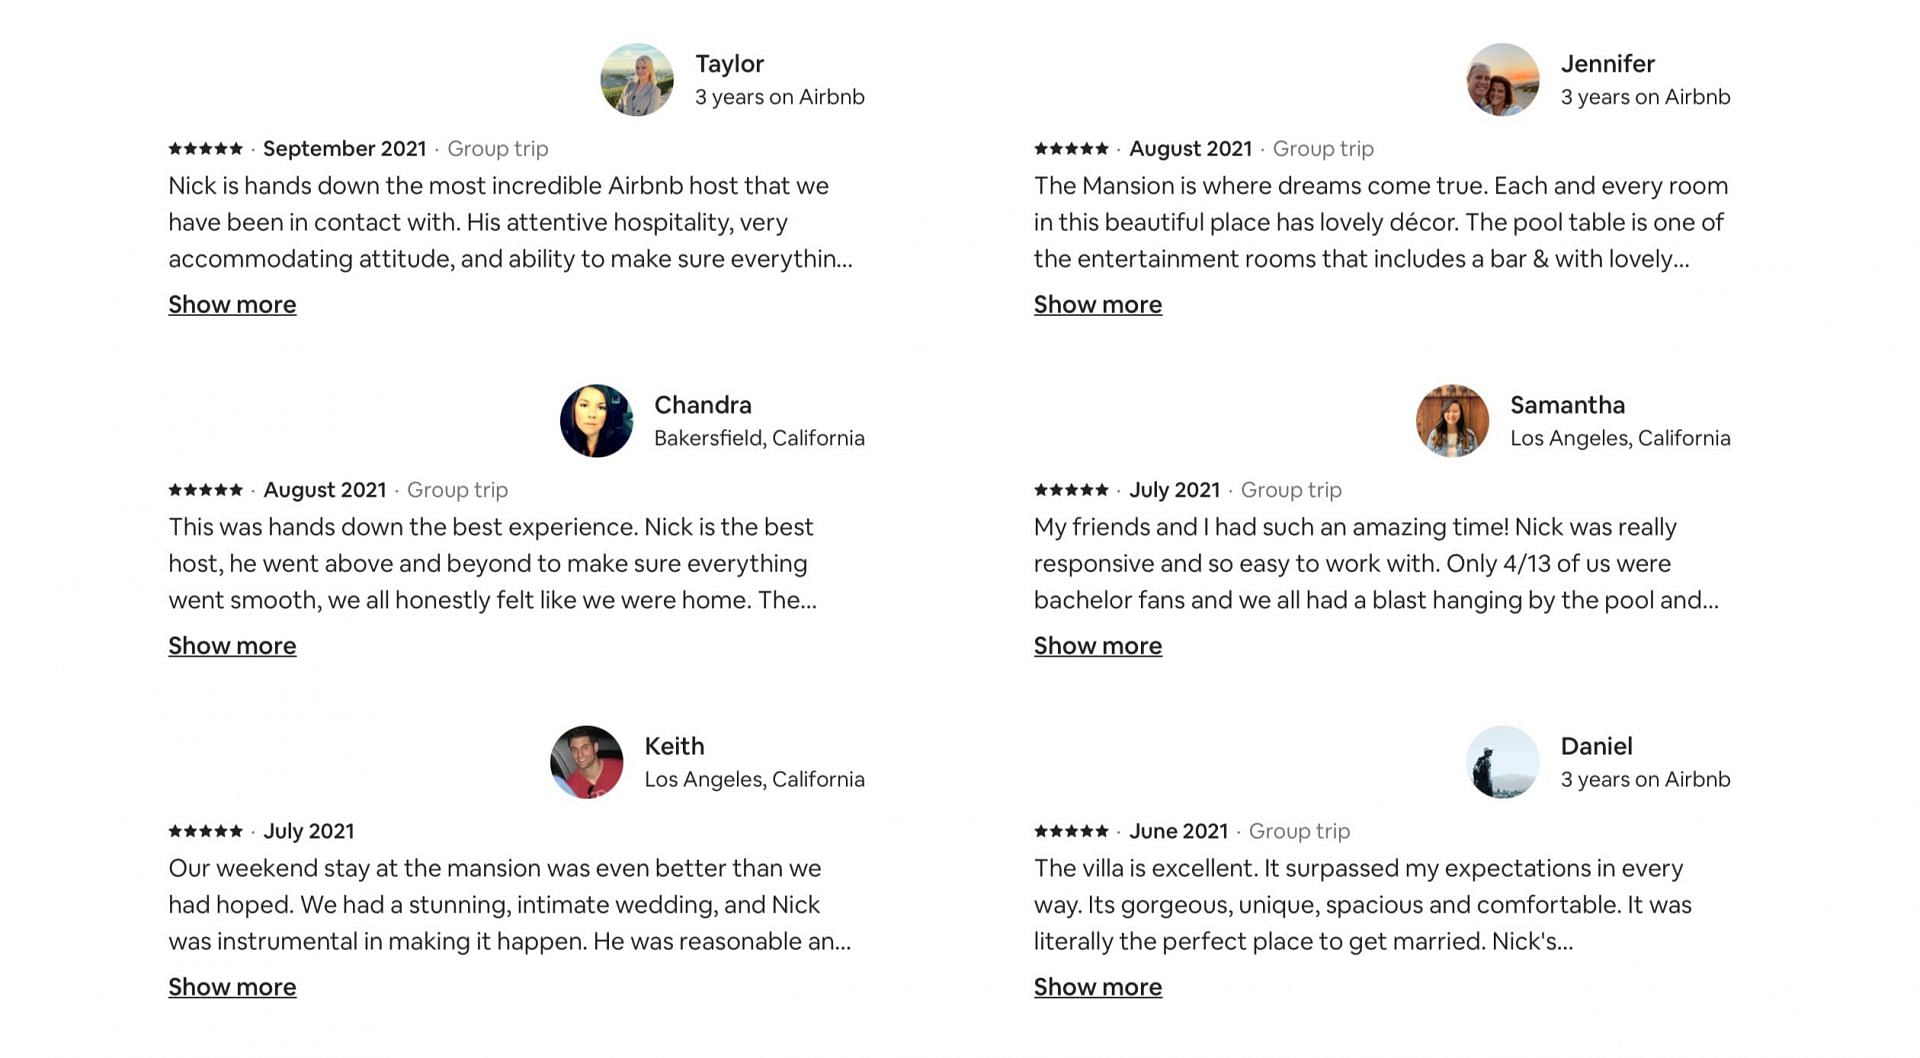 Reviews of Villa de la Vina by the guests who lived there (Image via Airbnb/@airbnb.com)